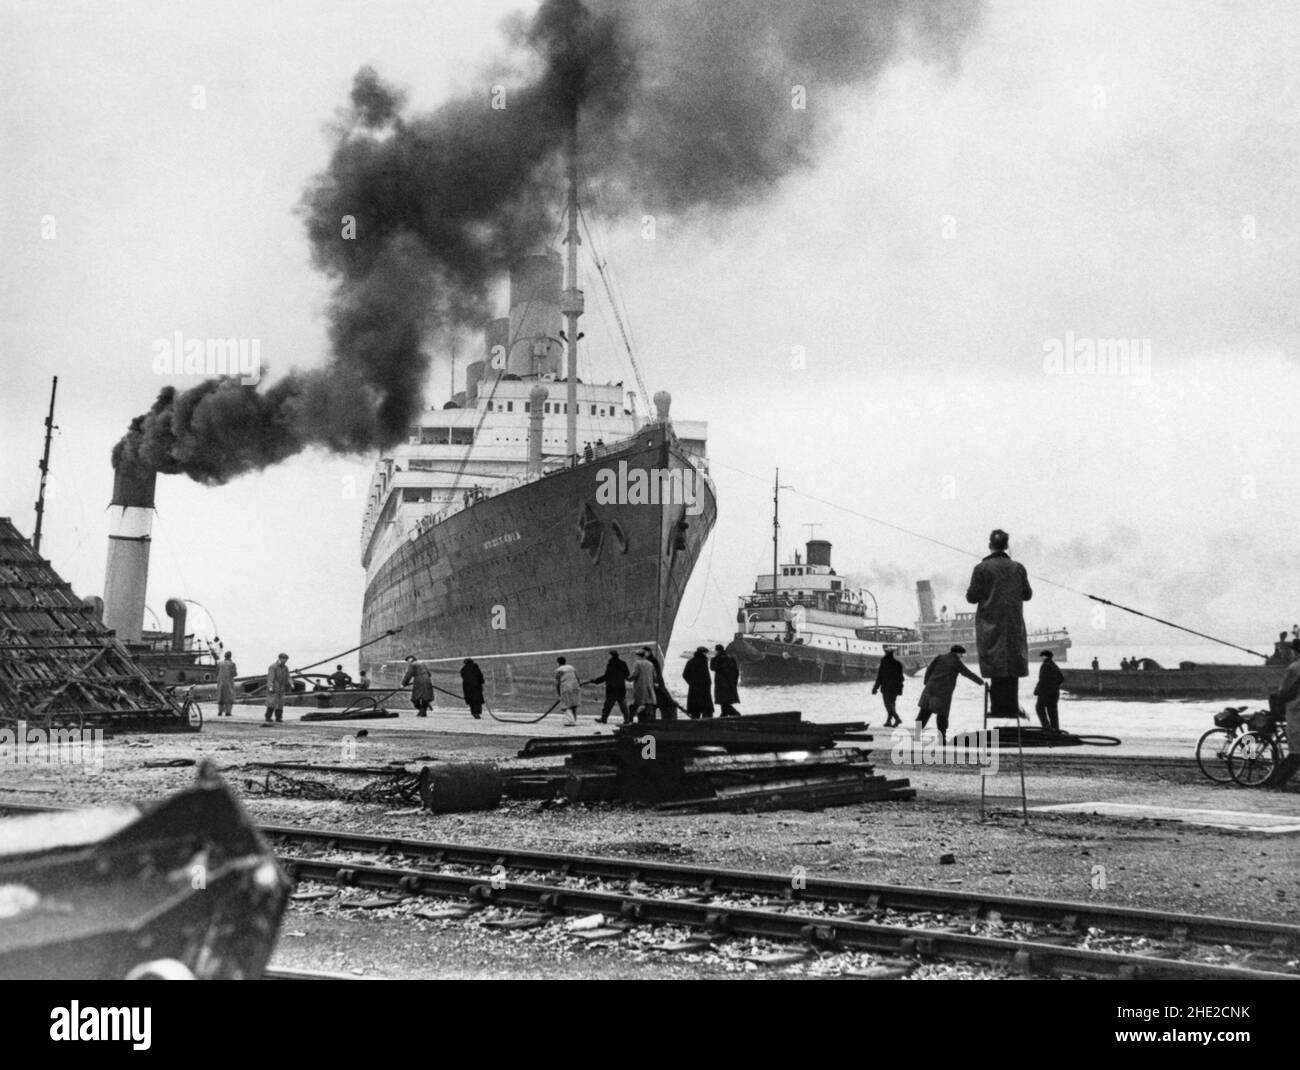 RMS Aquitania at Southampton docks, England, UK in the late 1940s. Aquitania was a British ocean liner of the Cunard Line. She built by John Brown & Company in Clydebank, Scotland. She was launched in 1913 and sailed on her maiden voyage from Liverpool to New York on 30 May 1914. She was used as a troop transport and a hospital ship in World War I. During World War II she served as a troop transport. After the war she transported migrants to Canada. Aquitania was retired from service in 1949 and was sold for scrapping the following year – a vintage 1940s photograph. Stock Photo